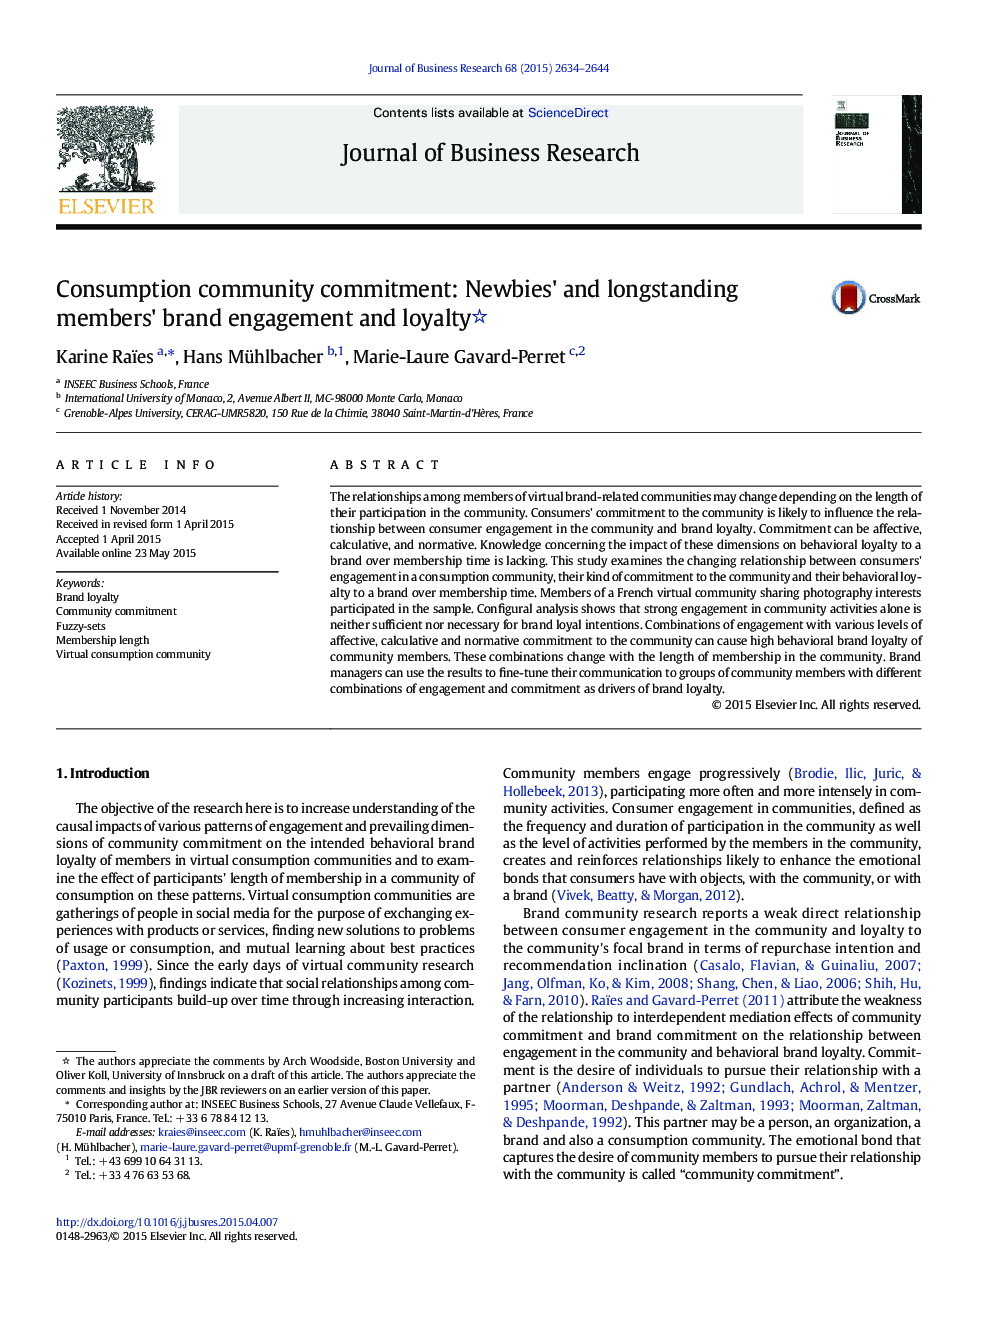 Consumption community commitment: Newbies' and longstanding members' brand engagement and loyalty 